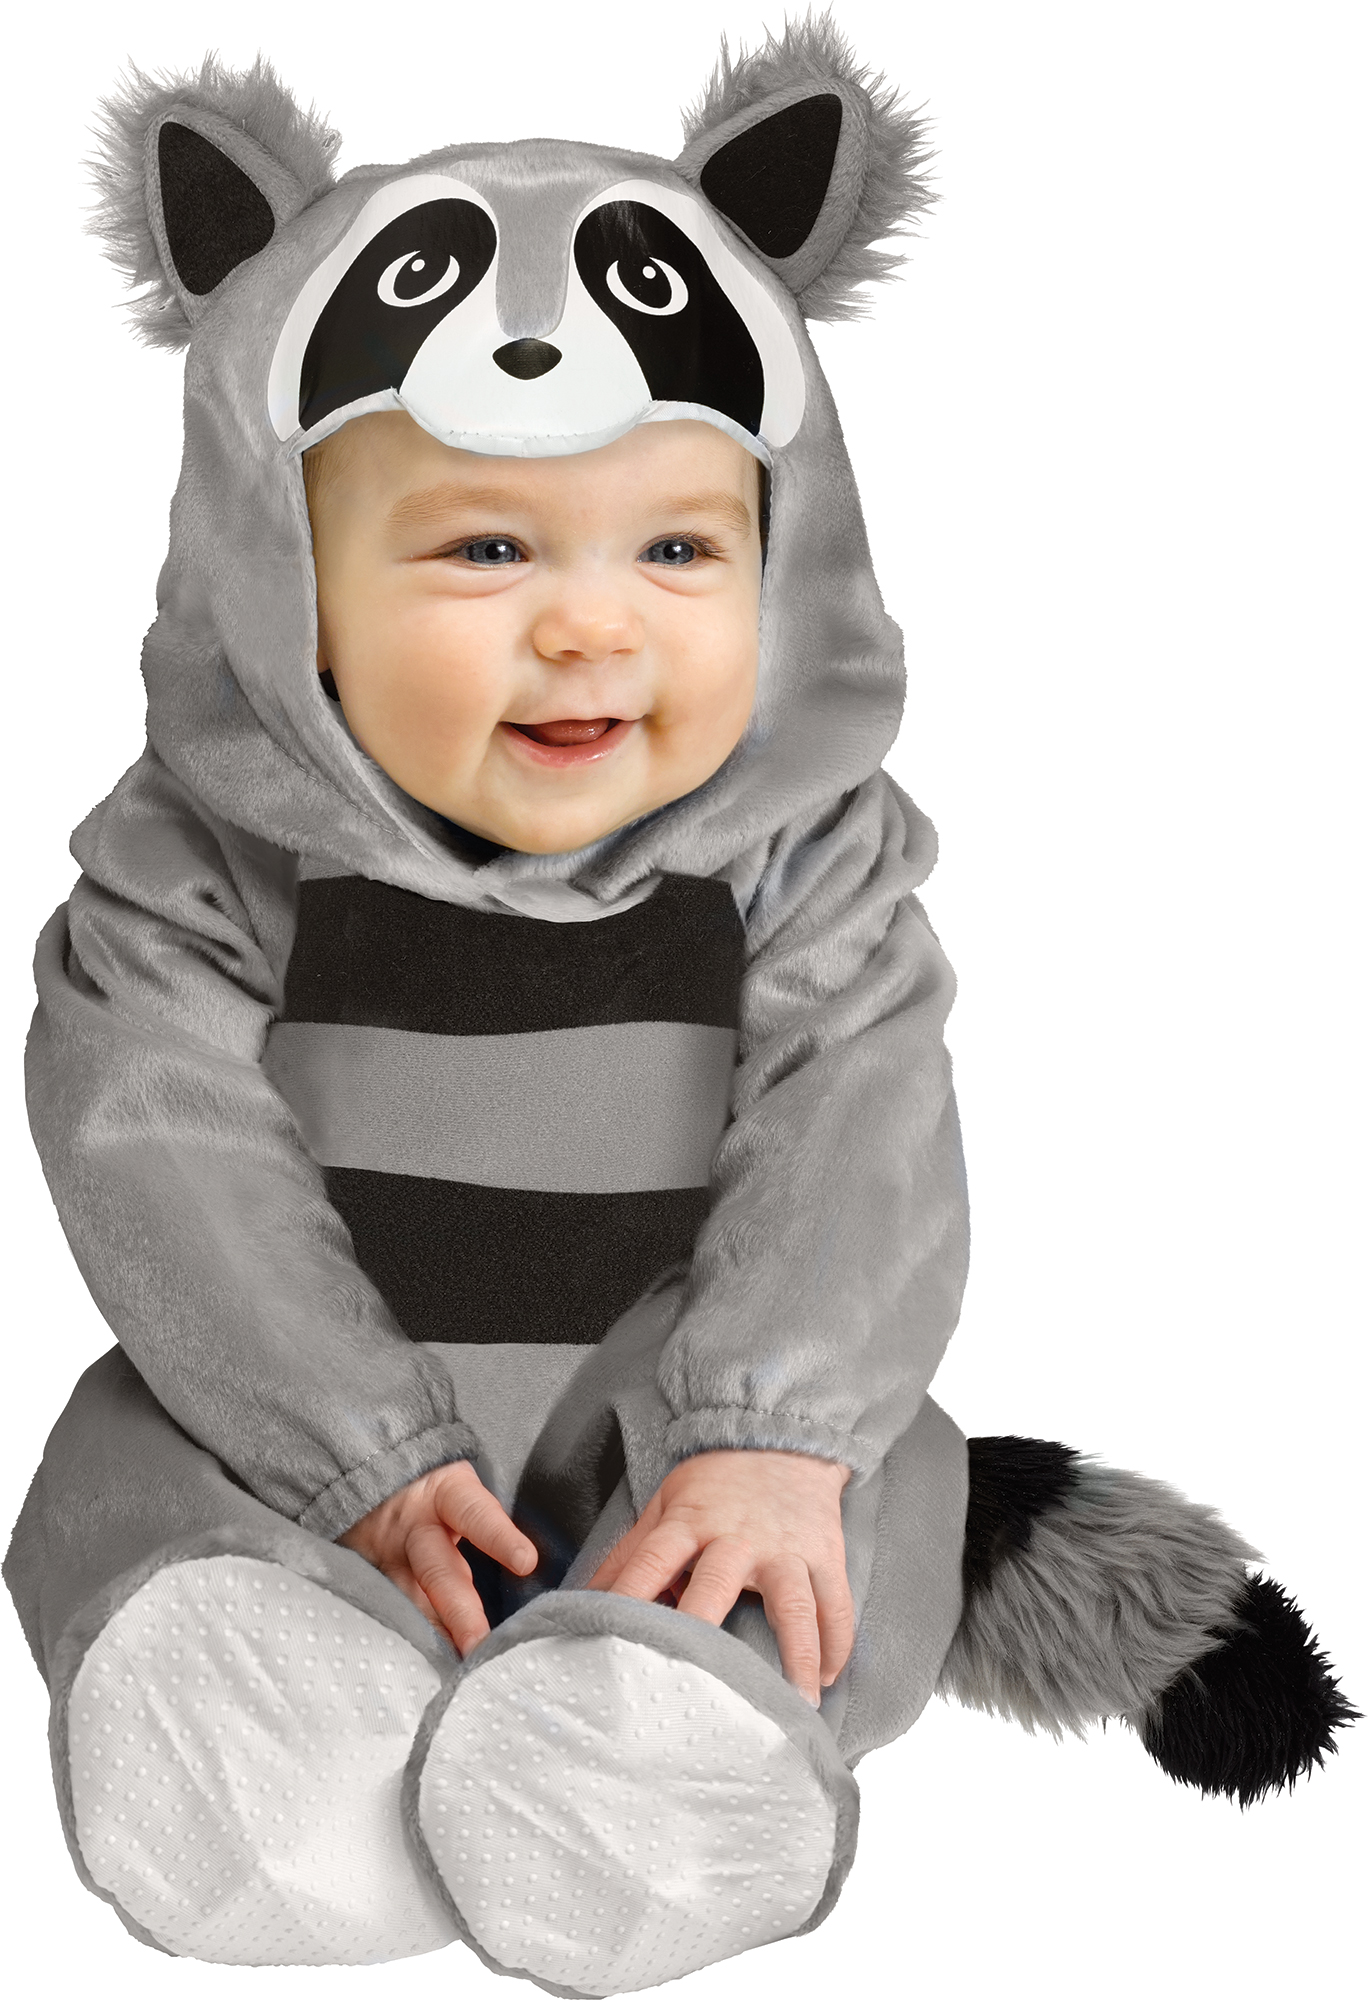 Fun World Baby Raccoon Costume Large Months Multicolor - image 1 of 2